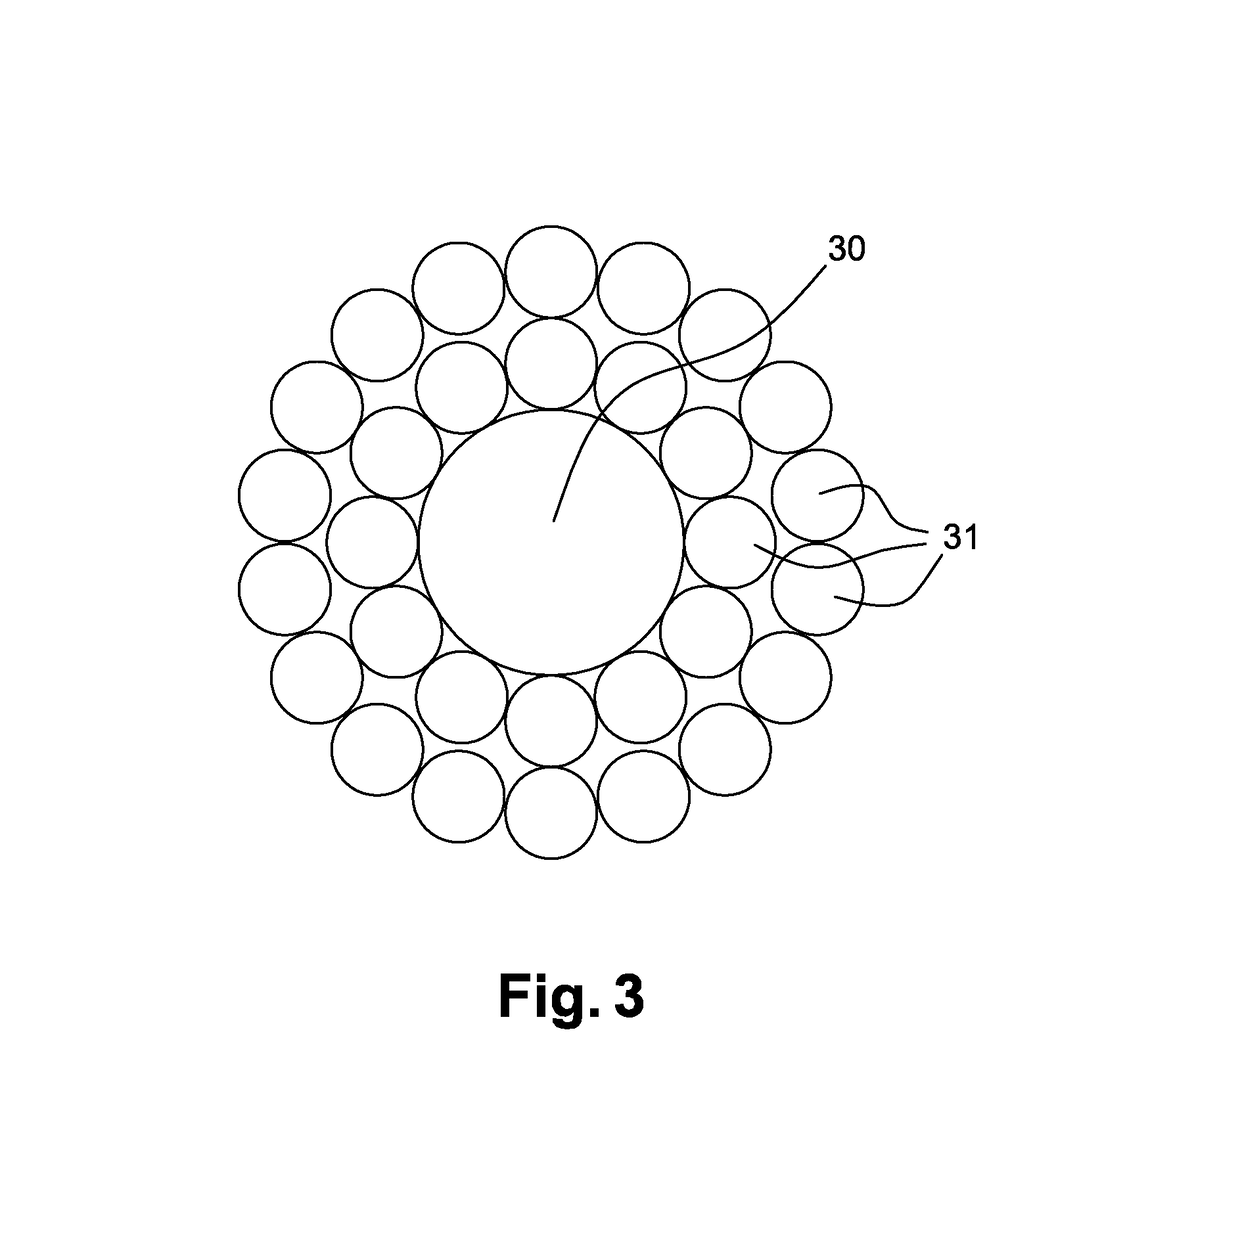 Electrical conductor for aeronautical applications